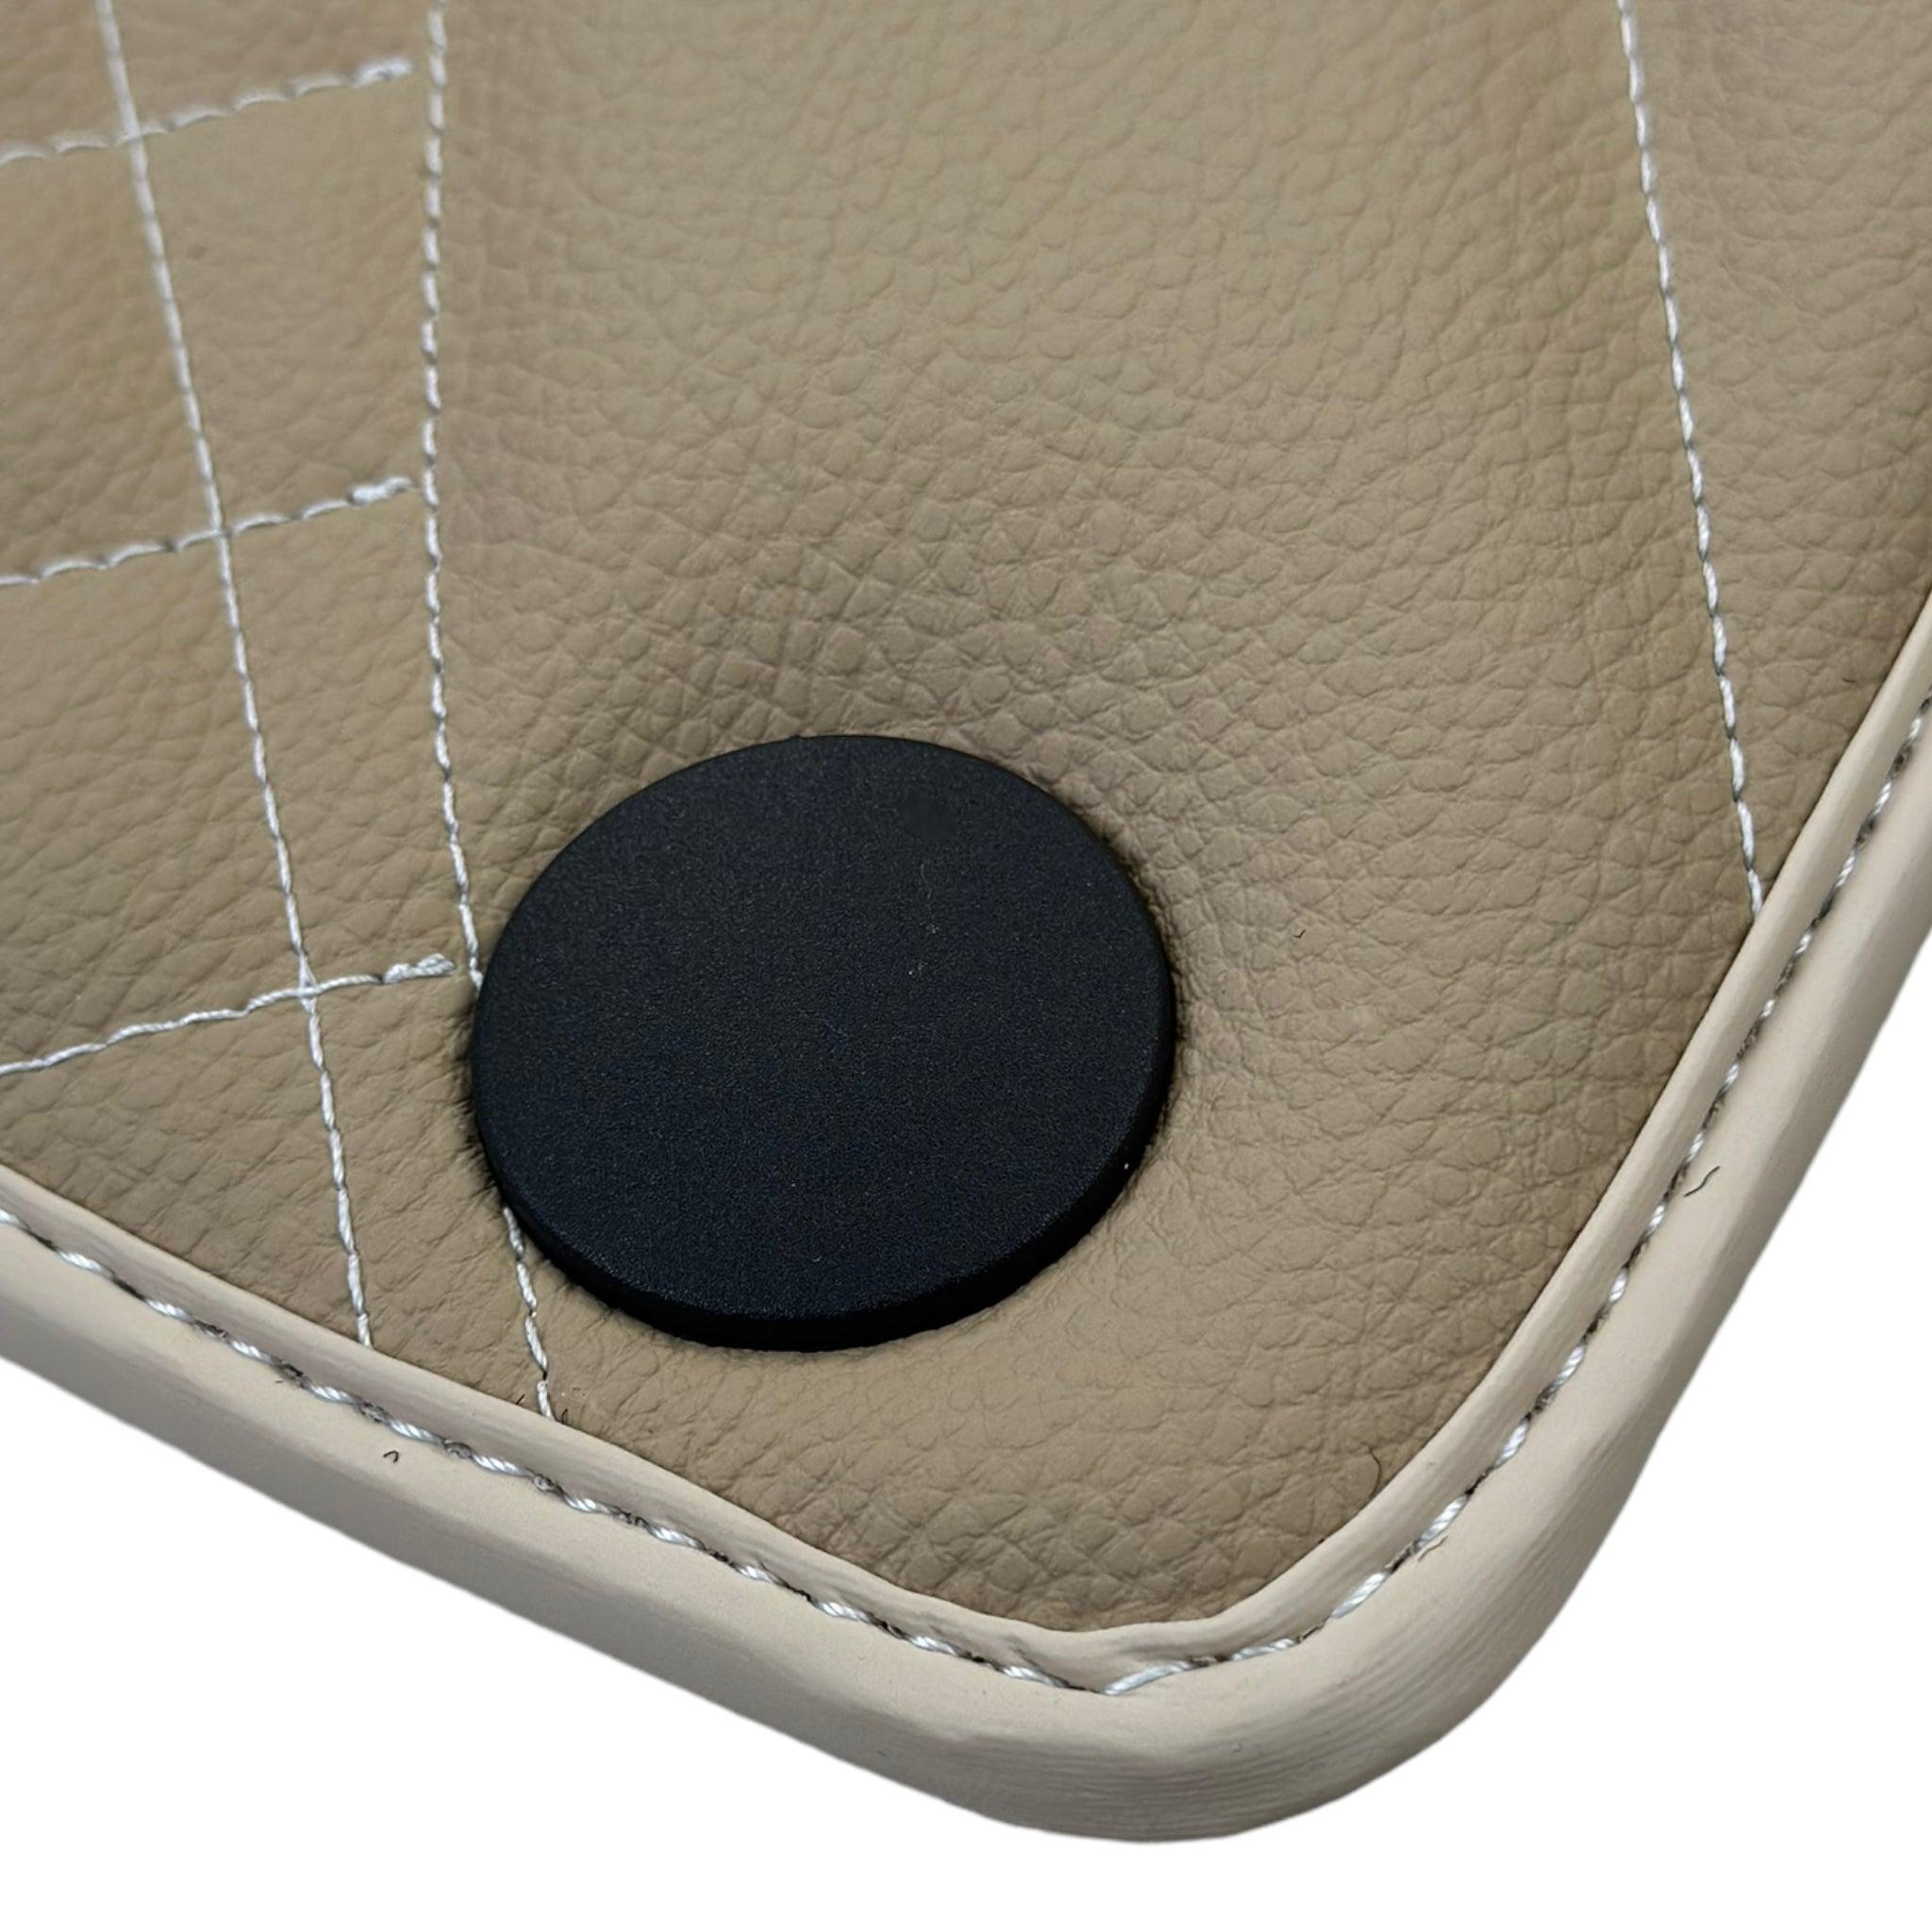 Beige Leather Floor Mats For Mercedes Benz S-Class Z223 Maybach (2021-2023)